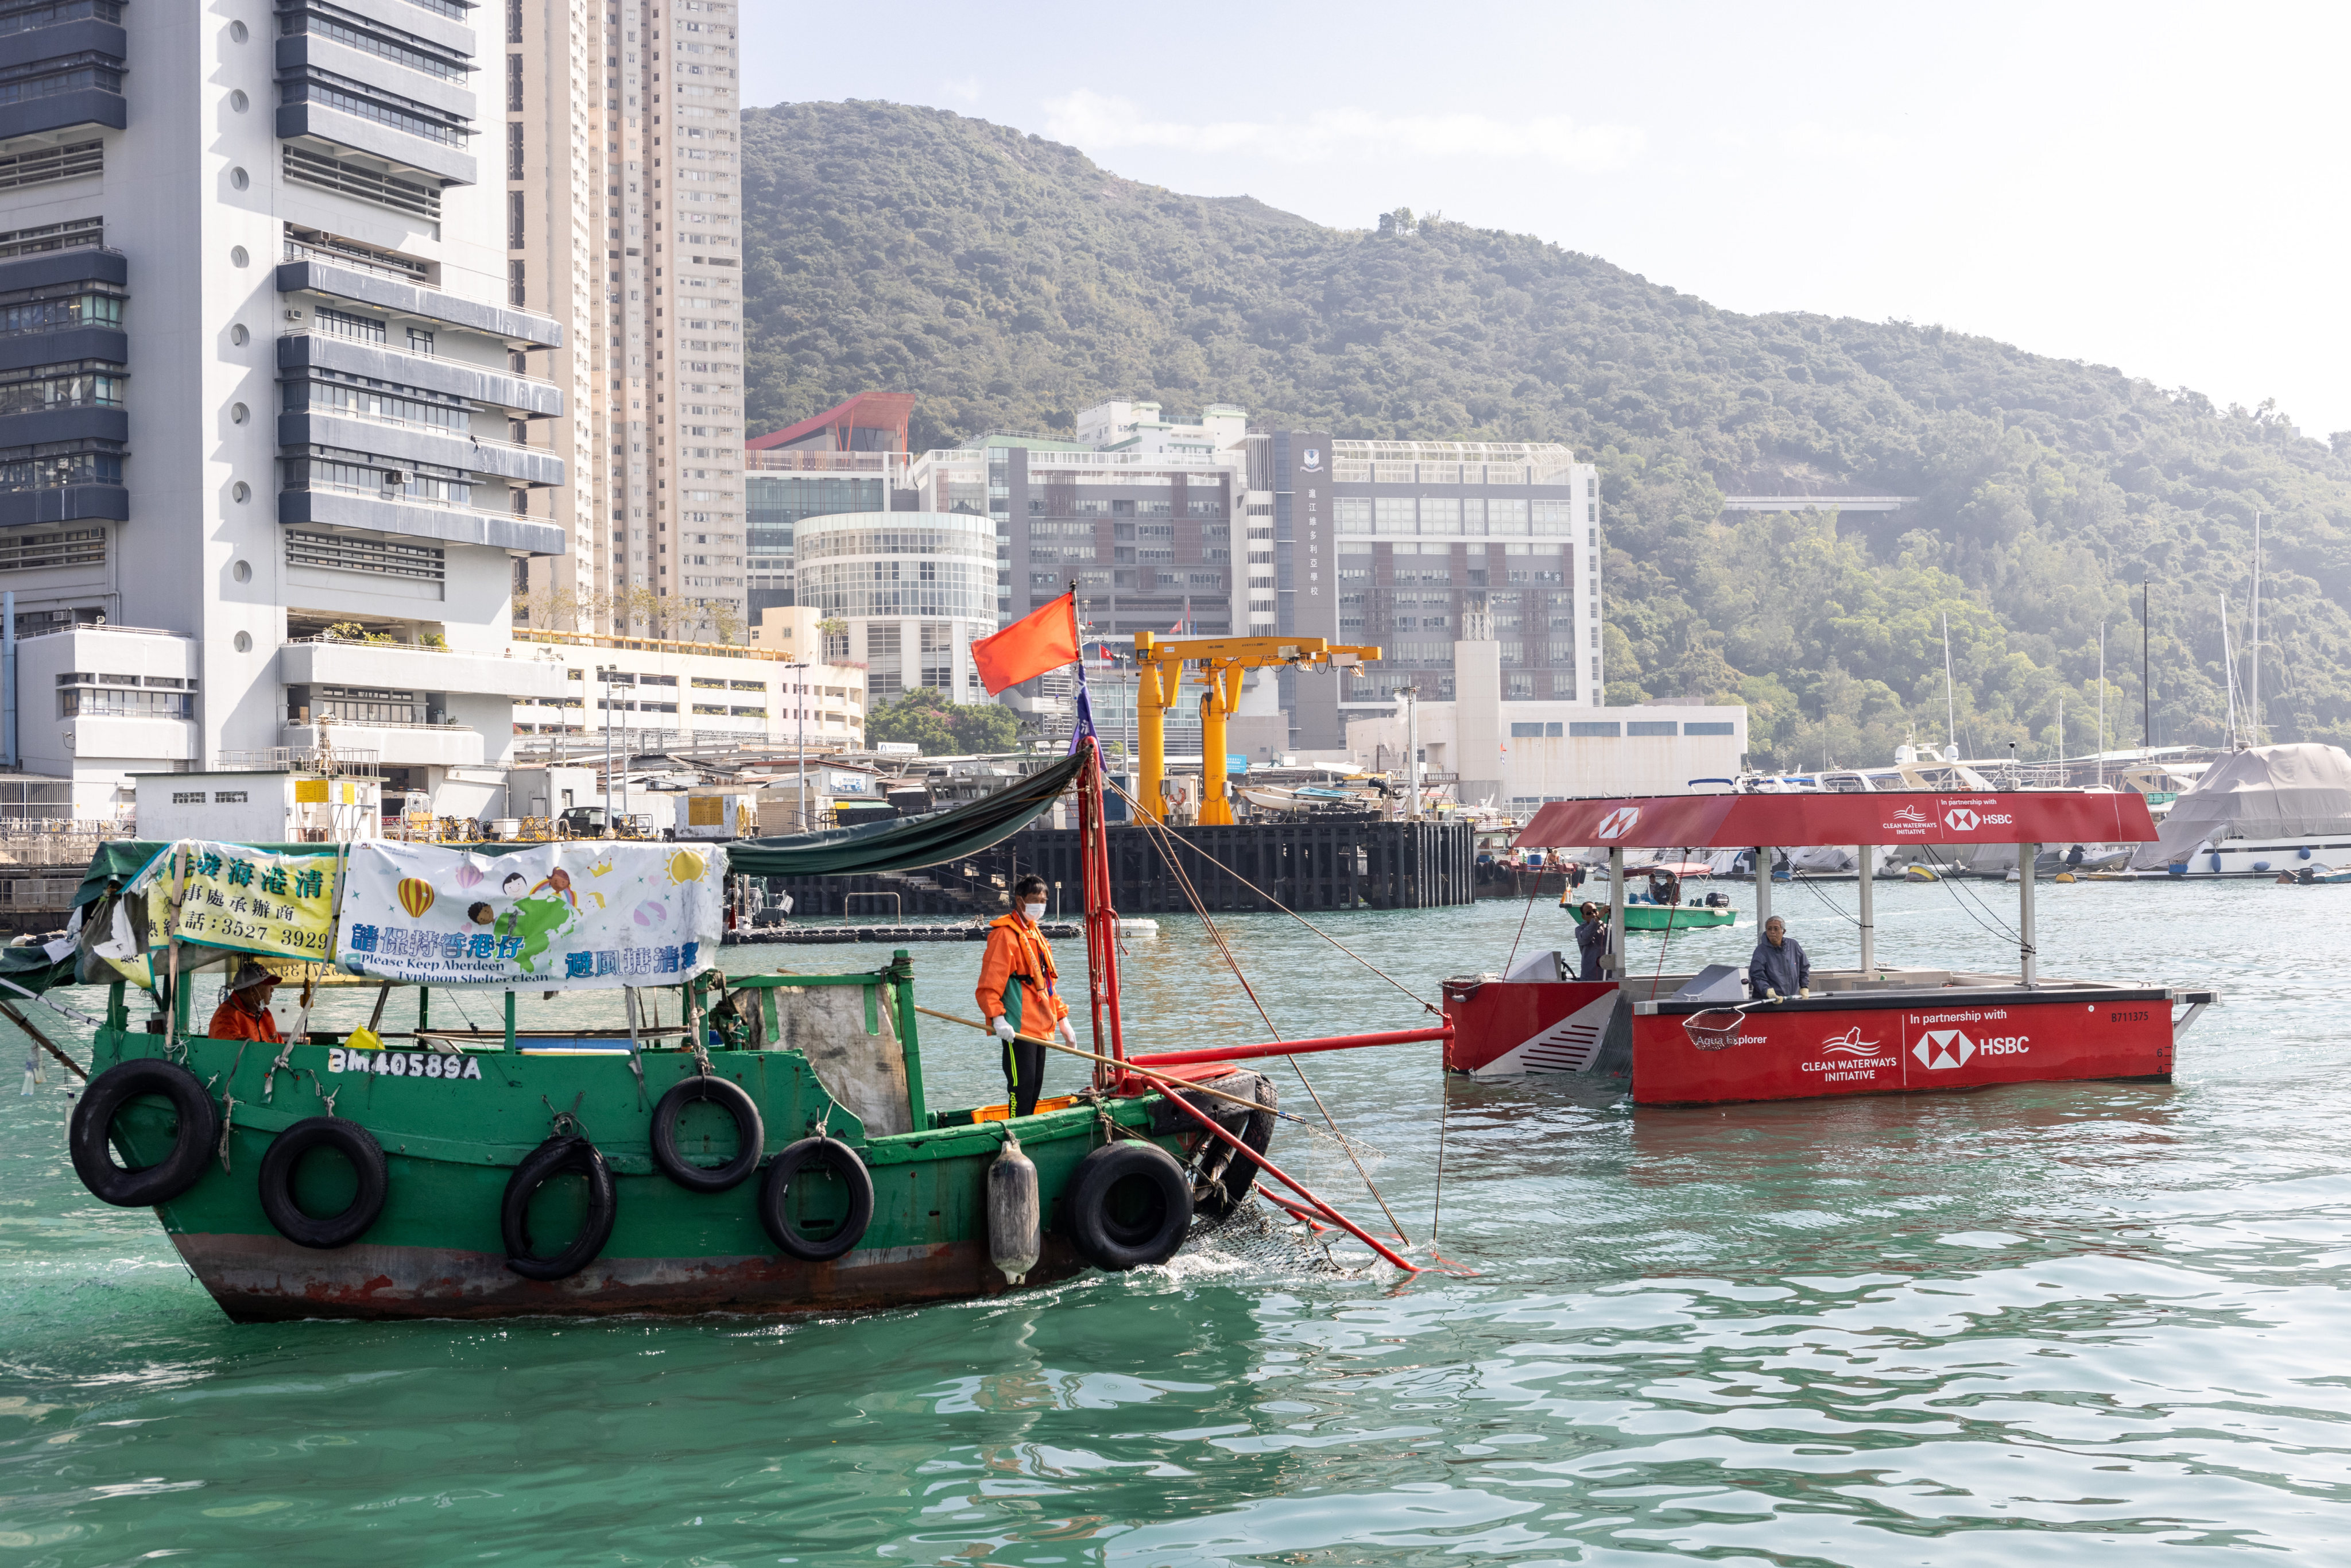 An HSBC Clean Waterways Programme vessel works to clean Hong Kong’s waters. Photo: Handout